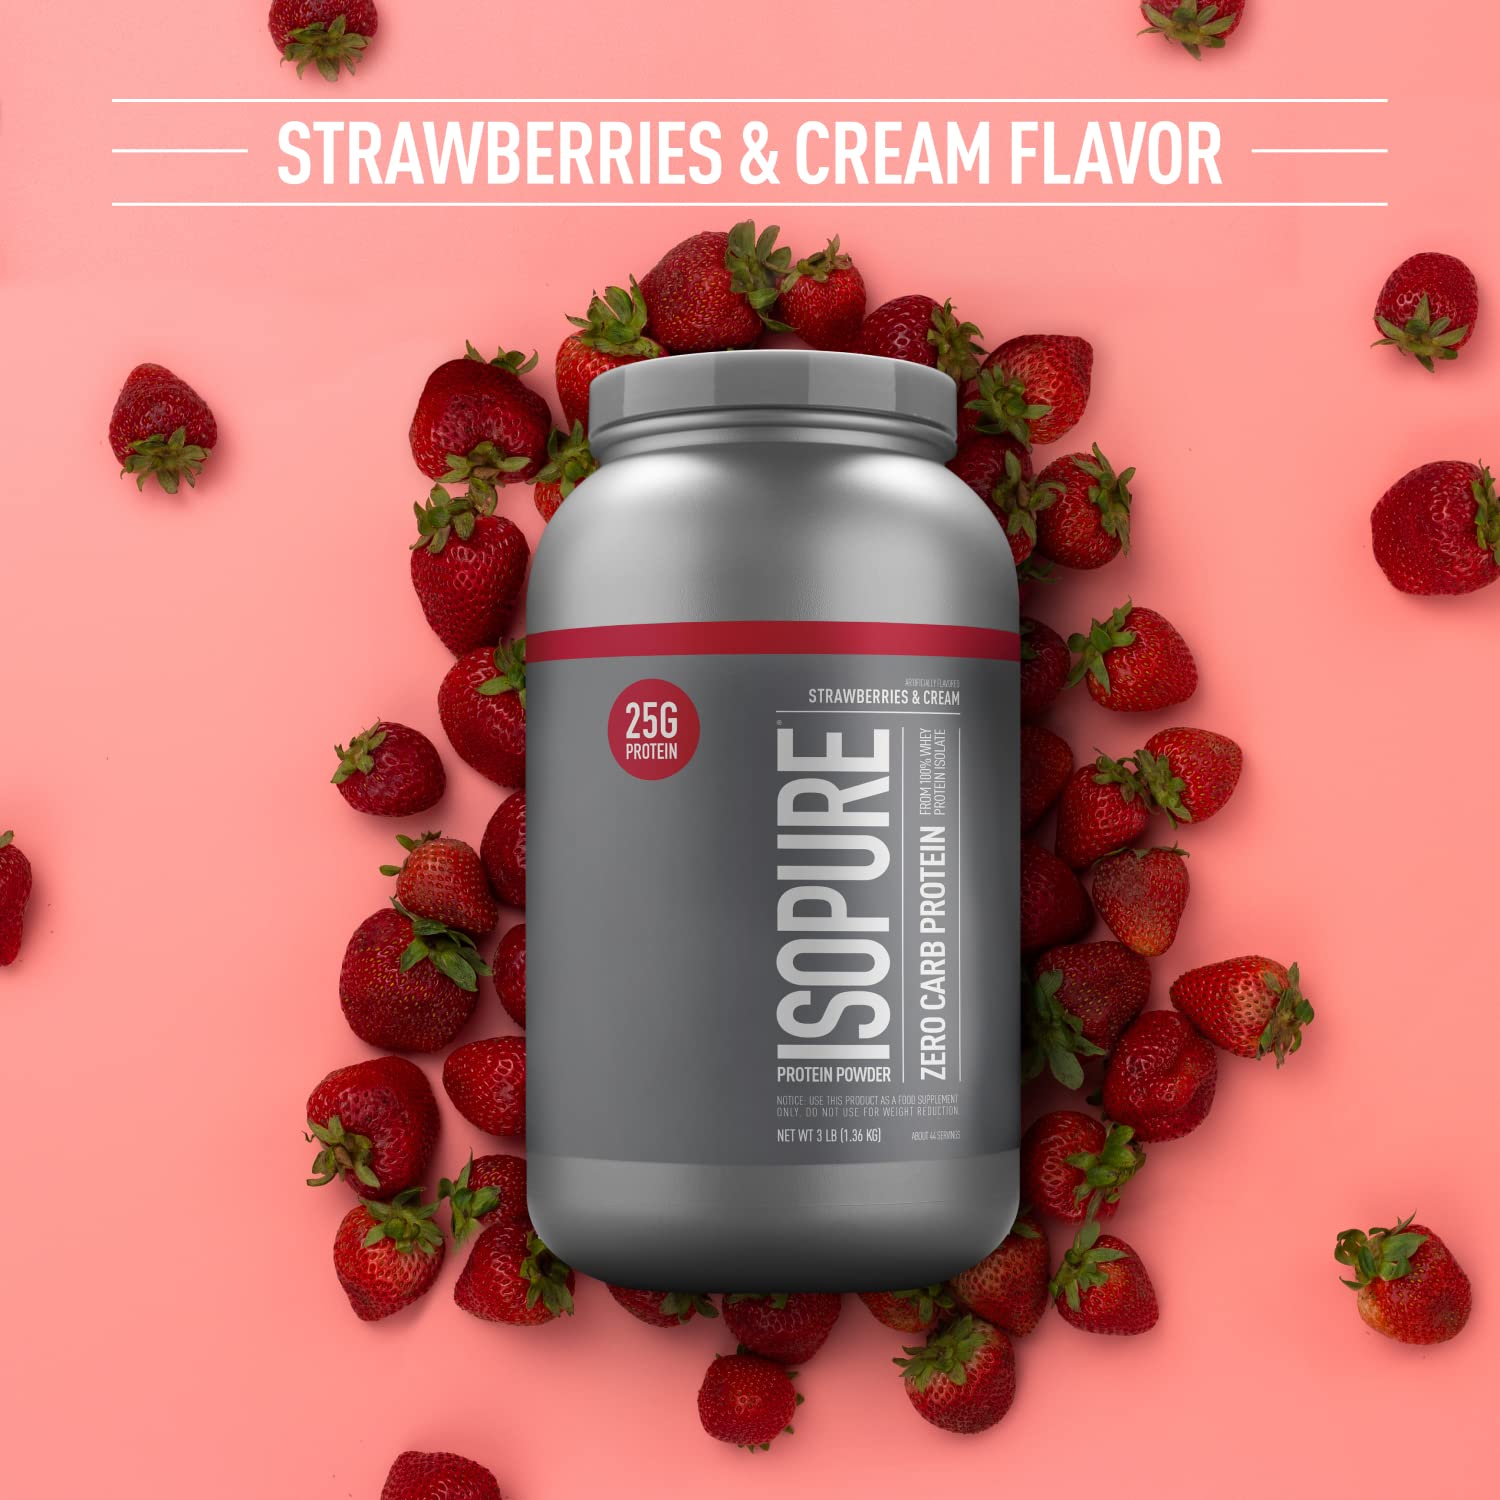 Isopure Protein Powder, Zero Carb Whey Isolate with Vitamin C & Zinc for Immune Support, 25g Protein, Keto Friendly, Strawberries & Cream, 44 Servings, 3 Pounds (Packaging May Vary)